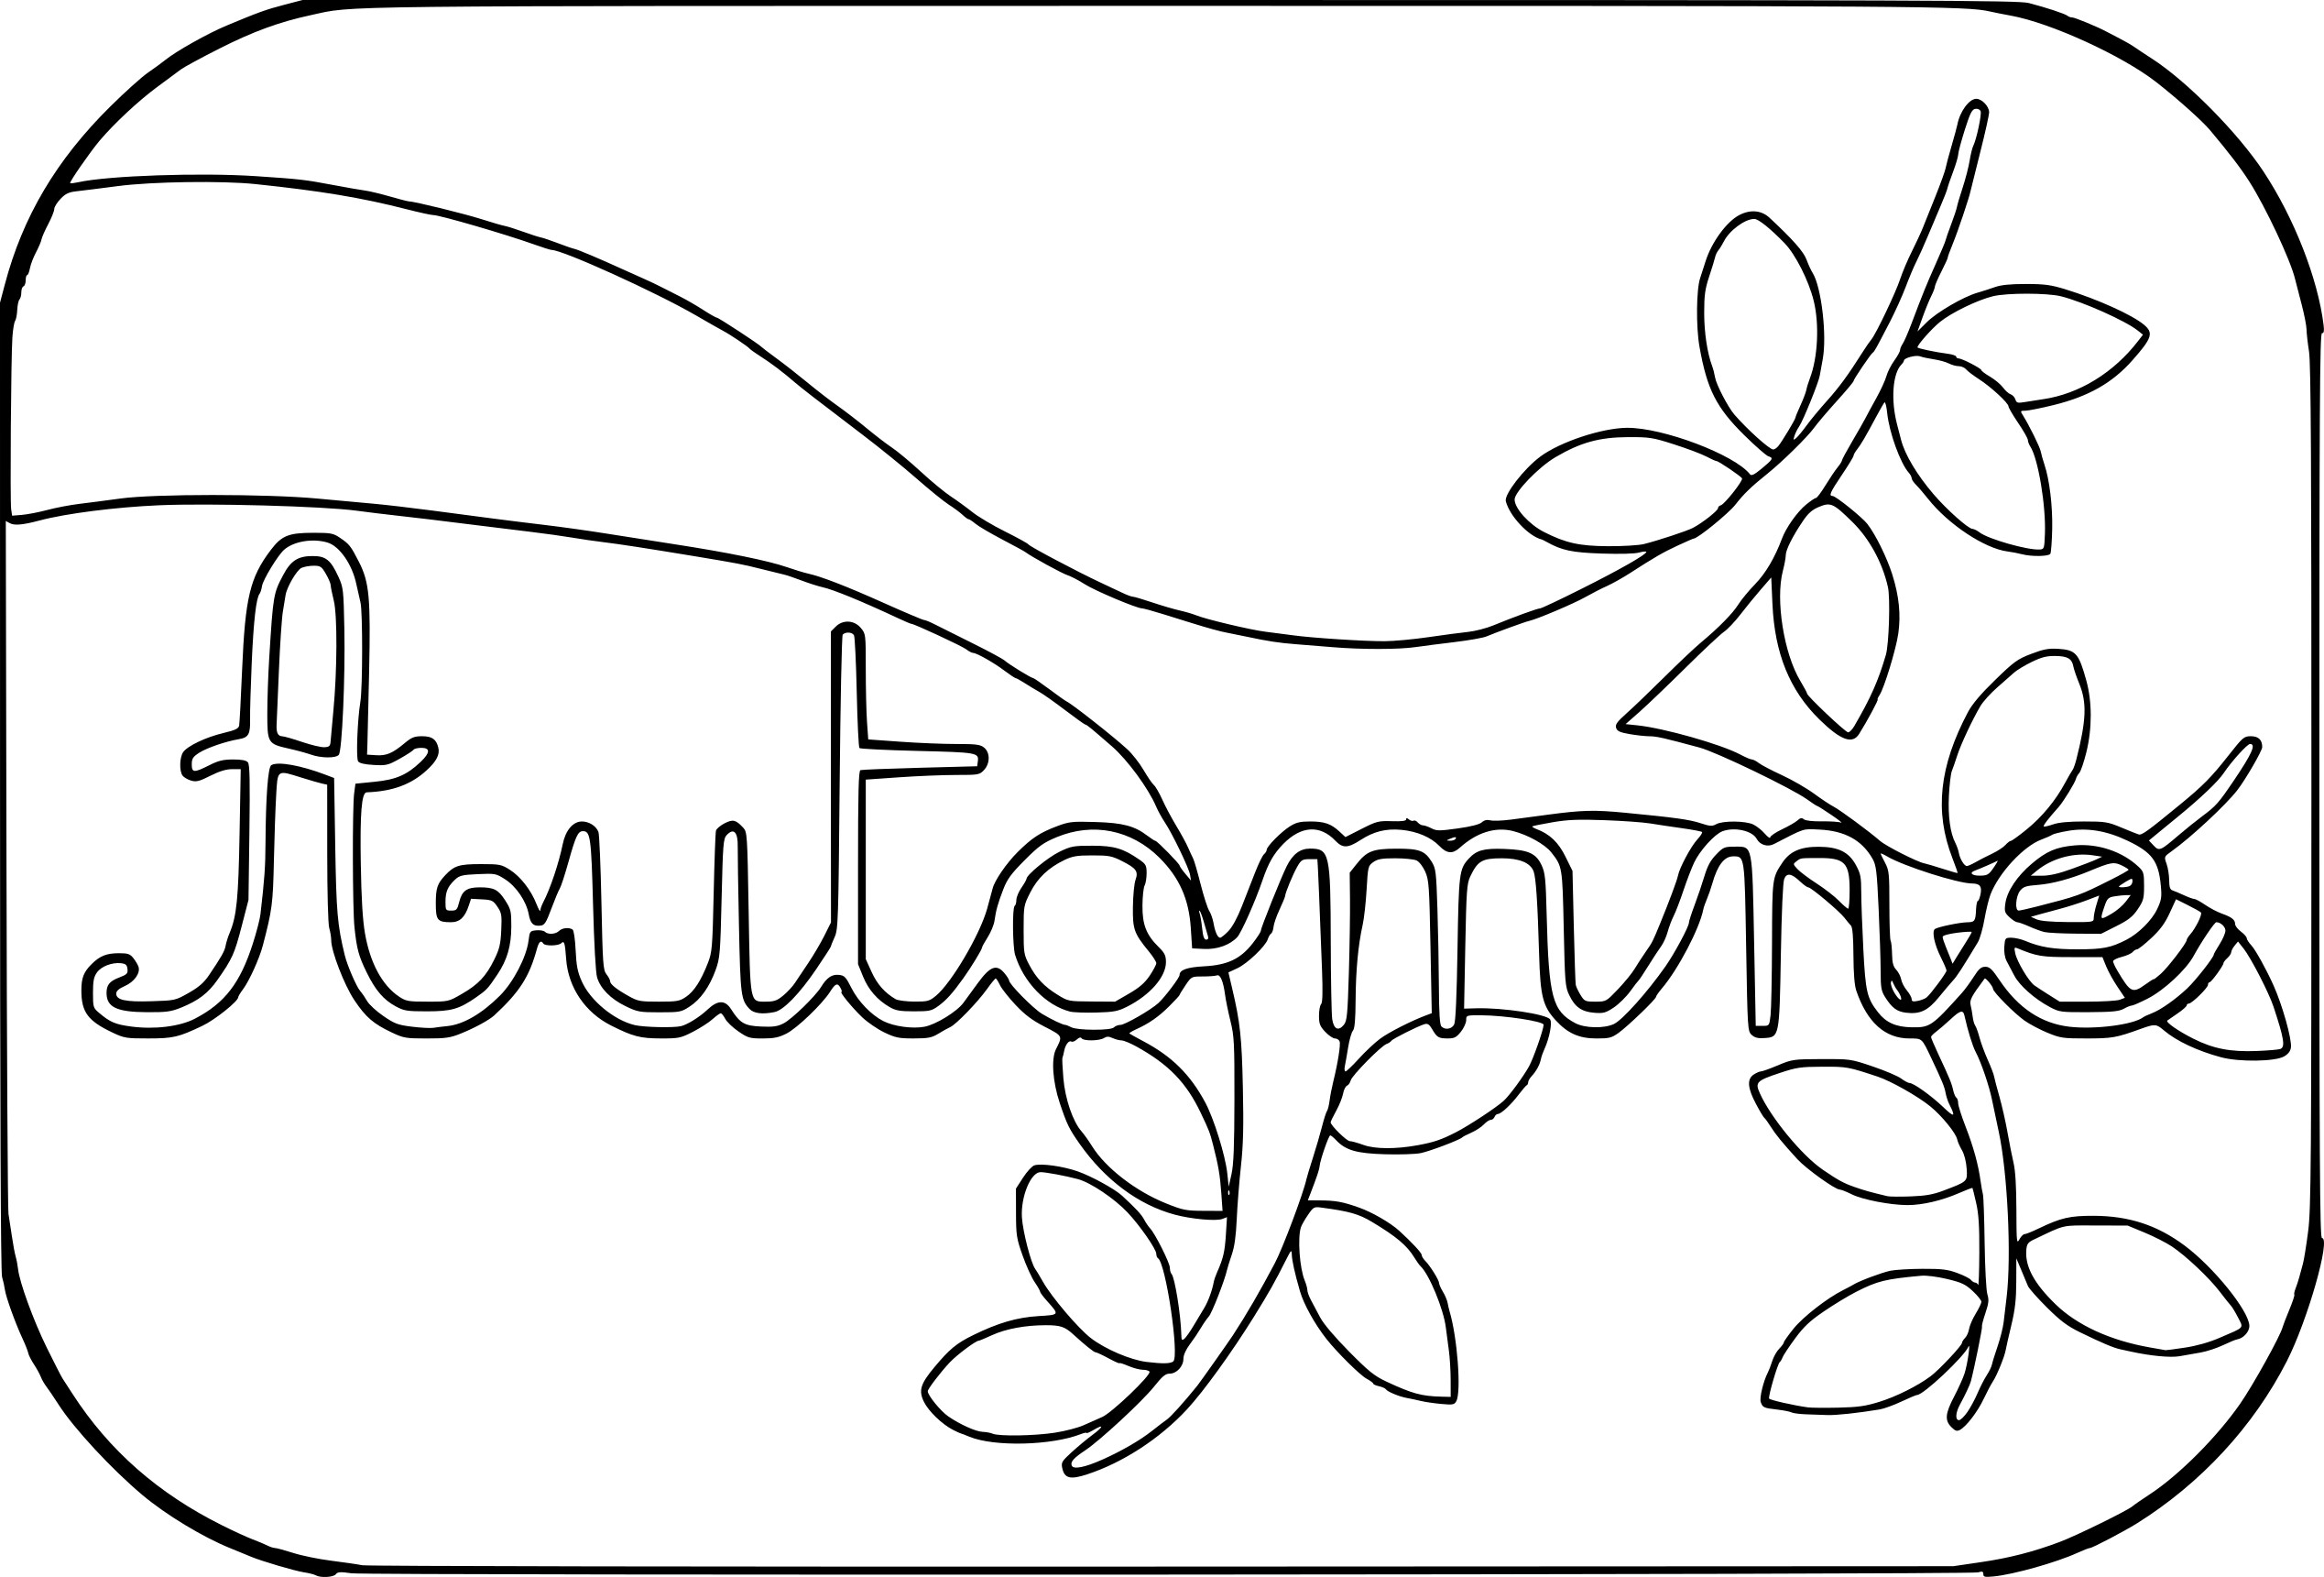 Fall coloring page